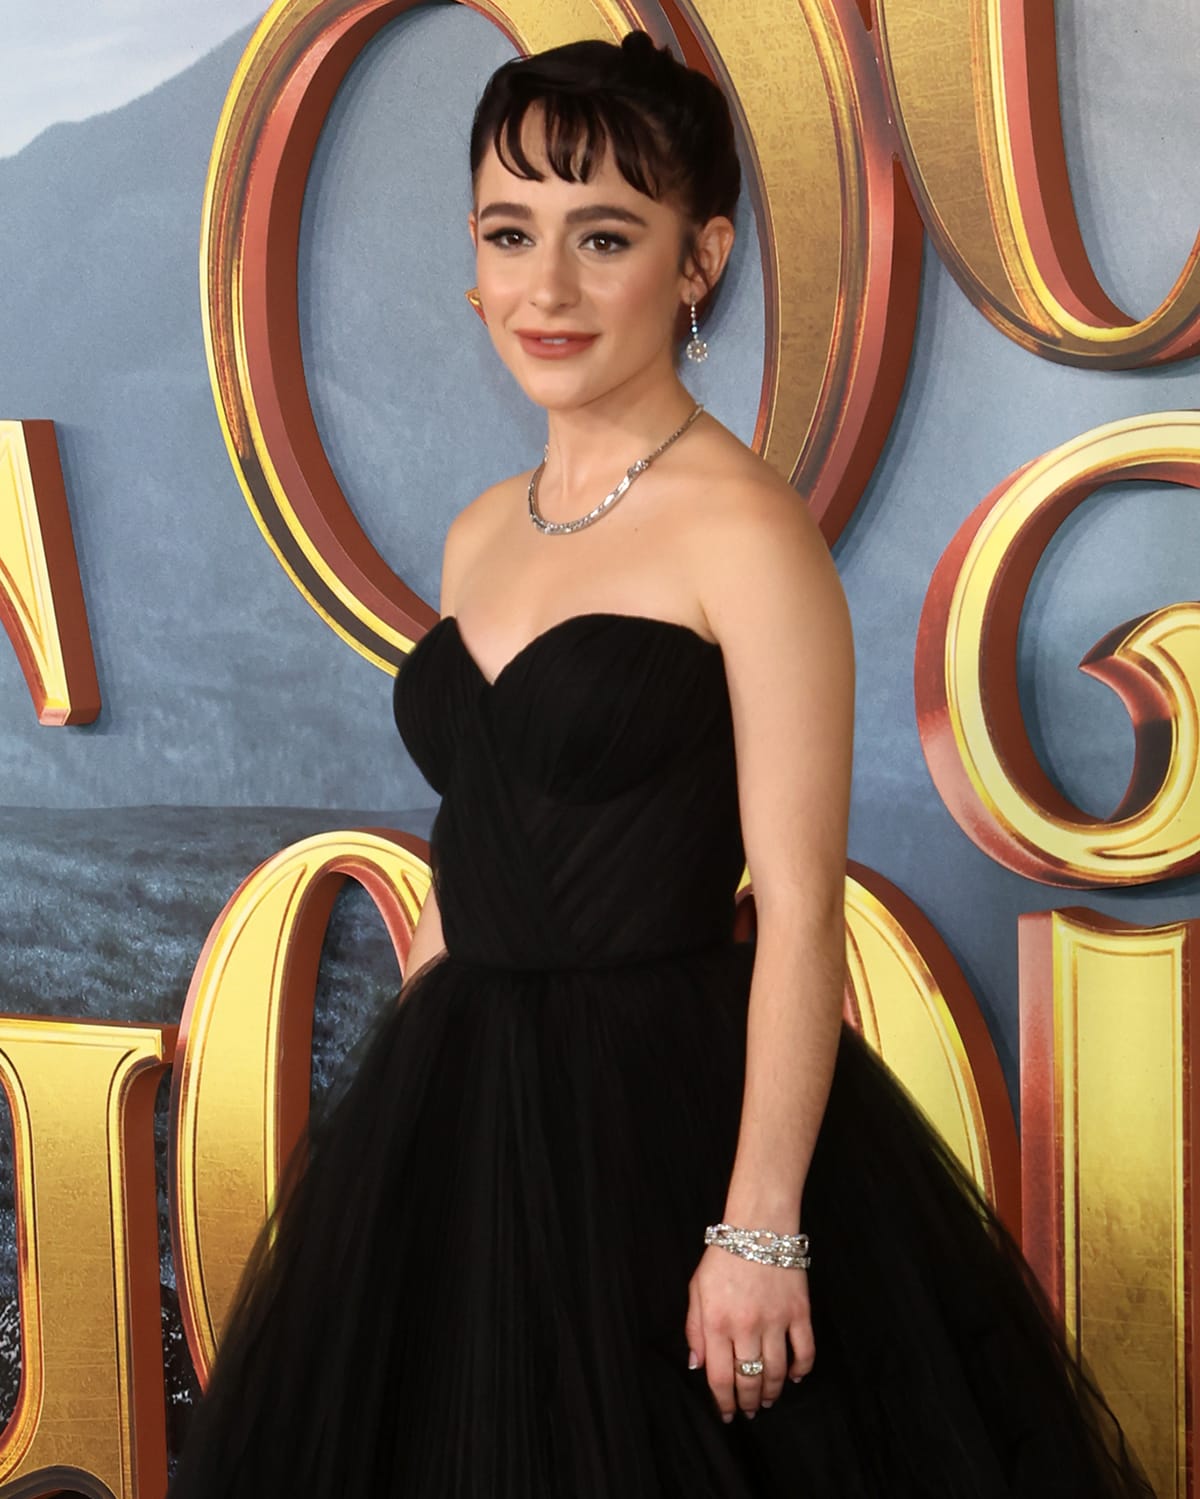 Sophia Anne Caruso wears Audrey Hepburn hairstyle and accessorizes with Neil Lane jewelry